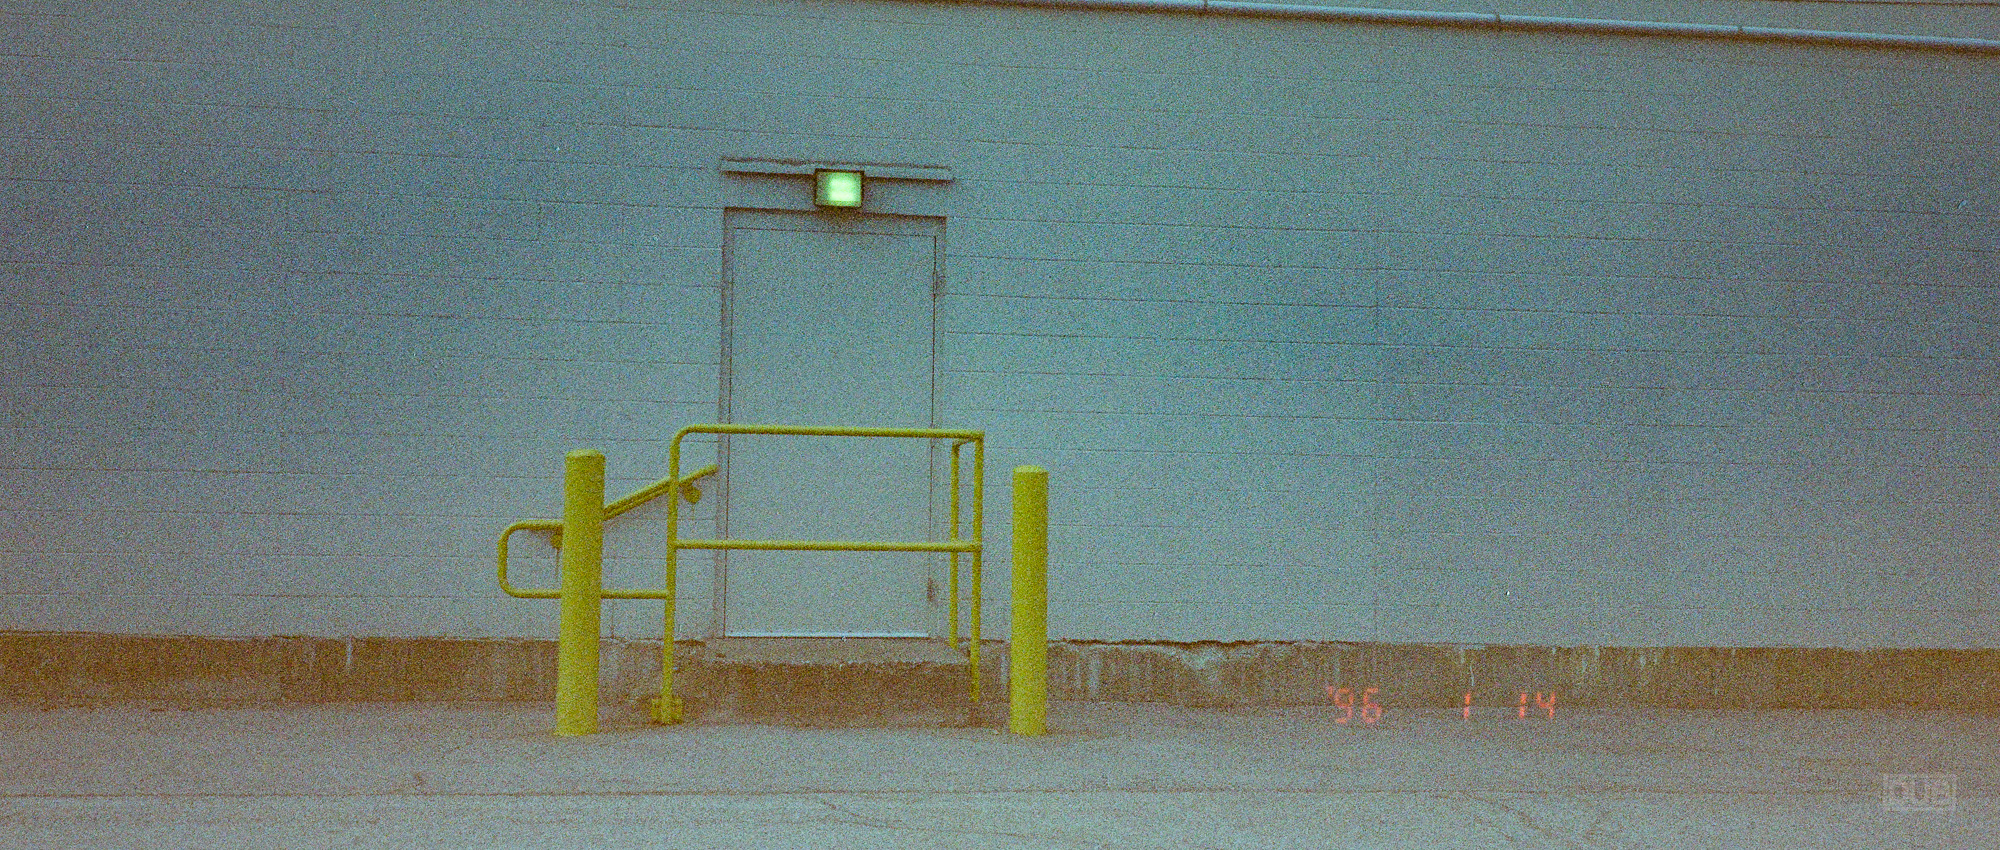 Olympus Stylus Epic DLX point and shoot camera and 3M expired 35mm film from Target